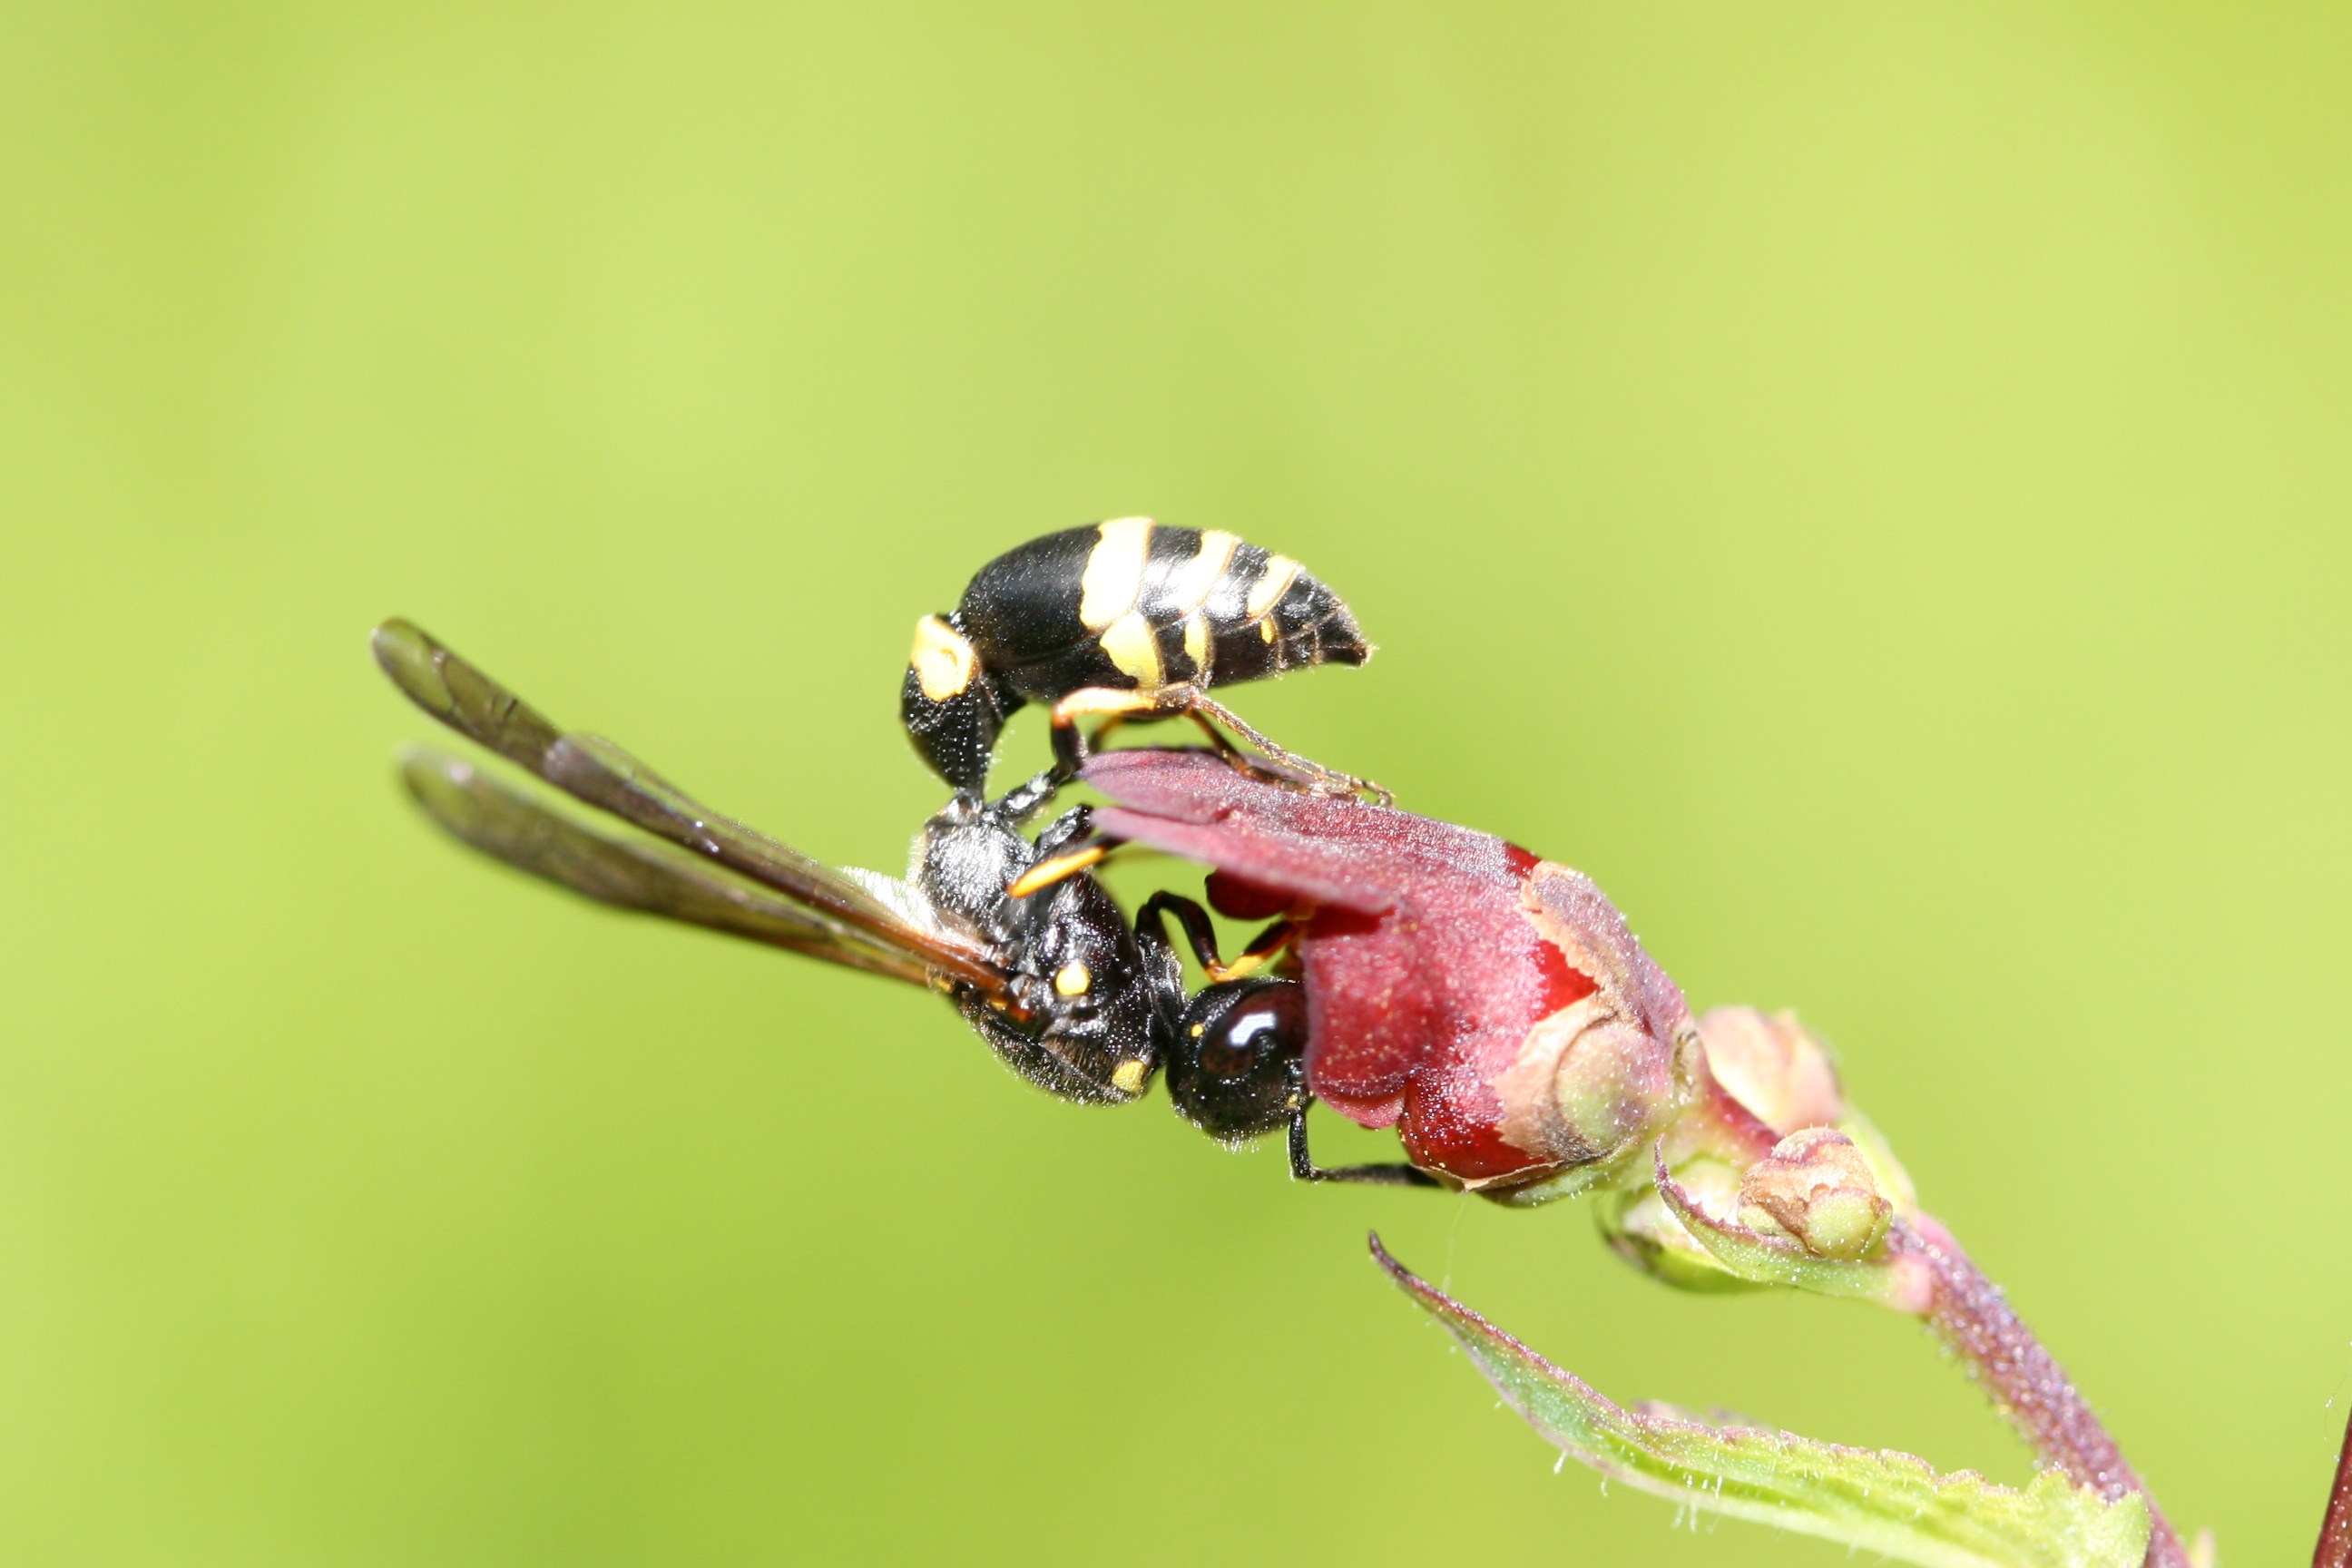 Symmorphus gracilis wasp sipping nectar from a figwort flower